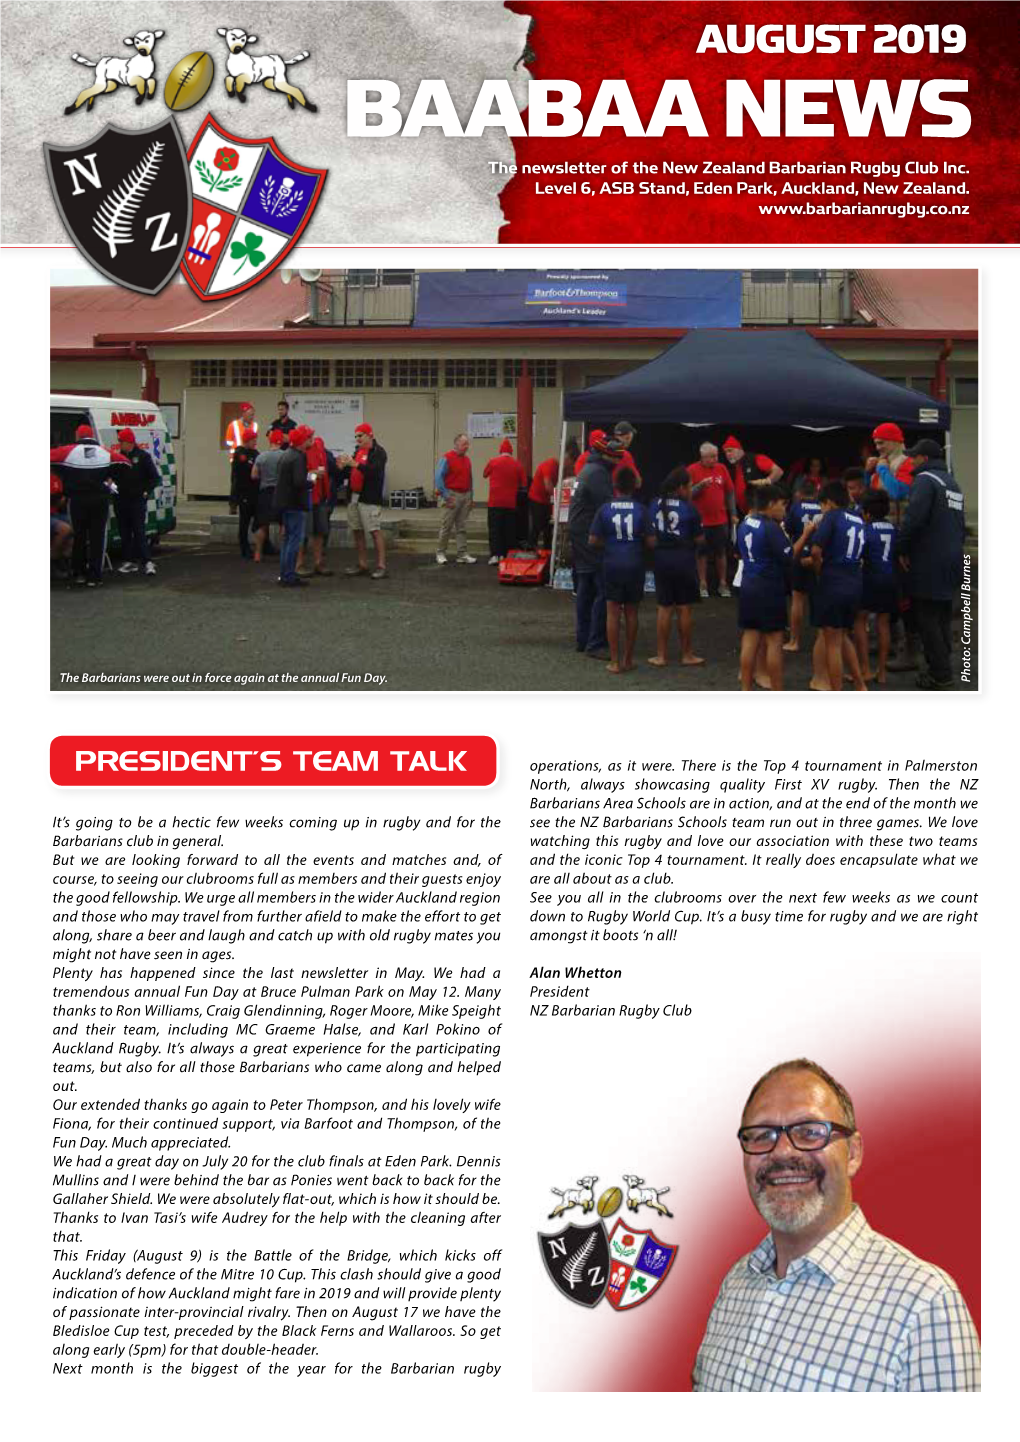 BAABAA NEWS the Newsletter of the New Zealand Barbarian Rugby Club Inc